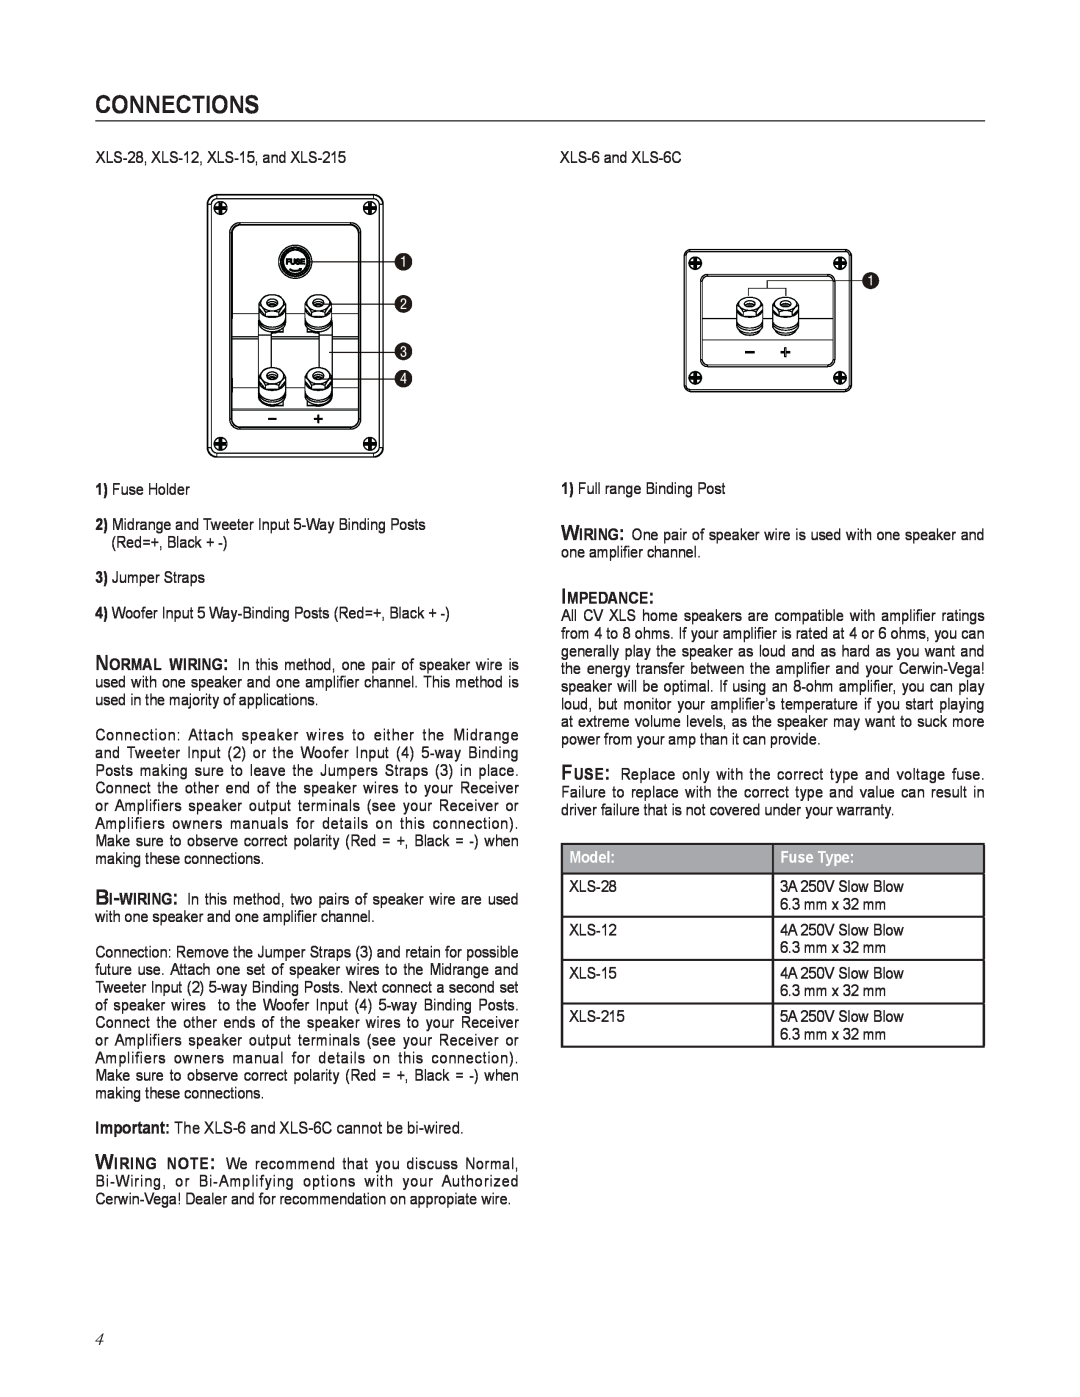 Cerwin-Vega user manual connections, Important The XLS-6and XLS-6Ccannot be bi-wired, Model, Fuse Type 